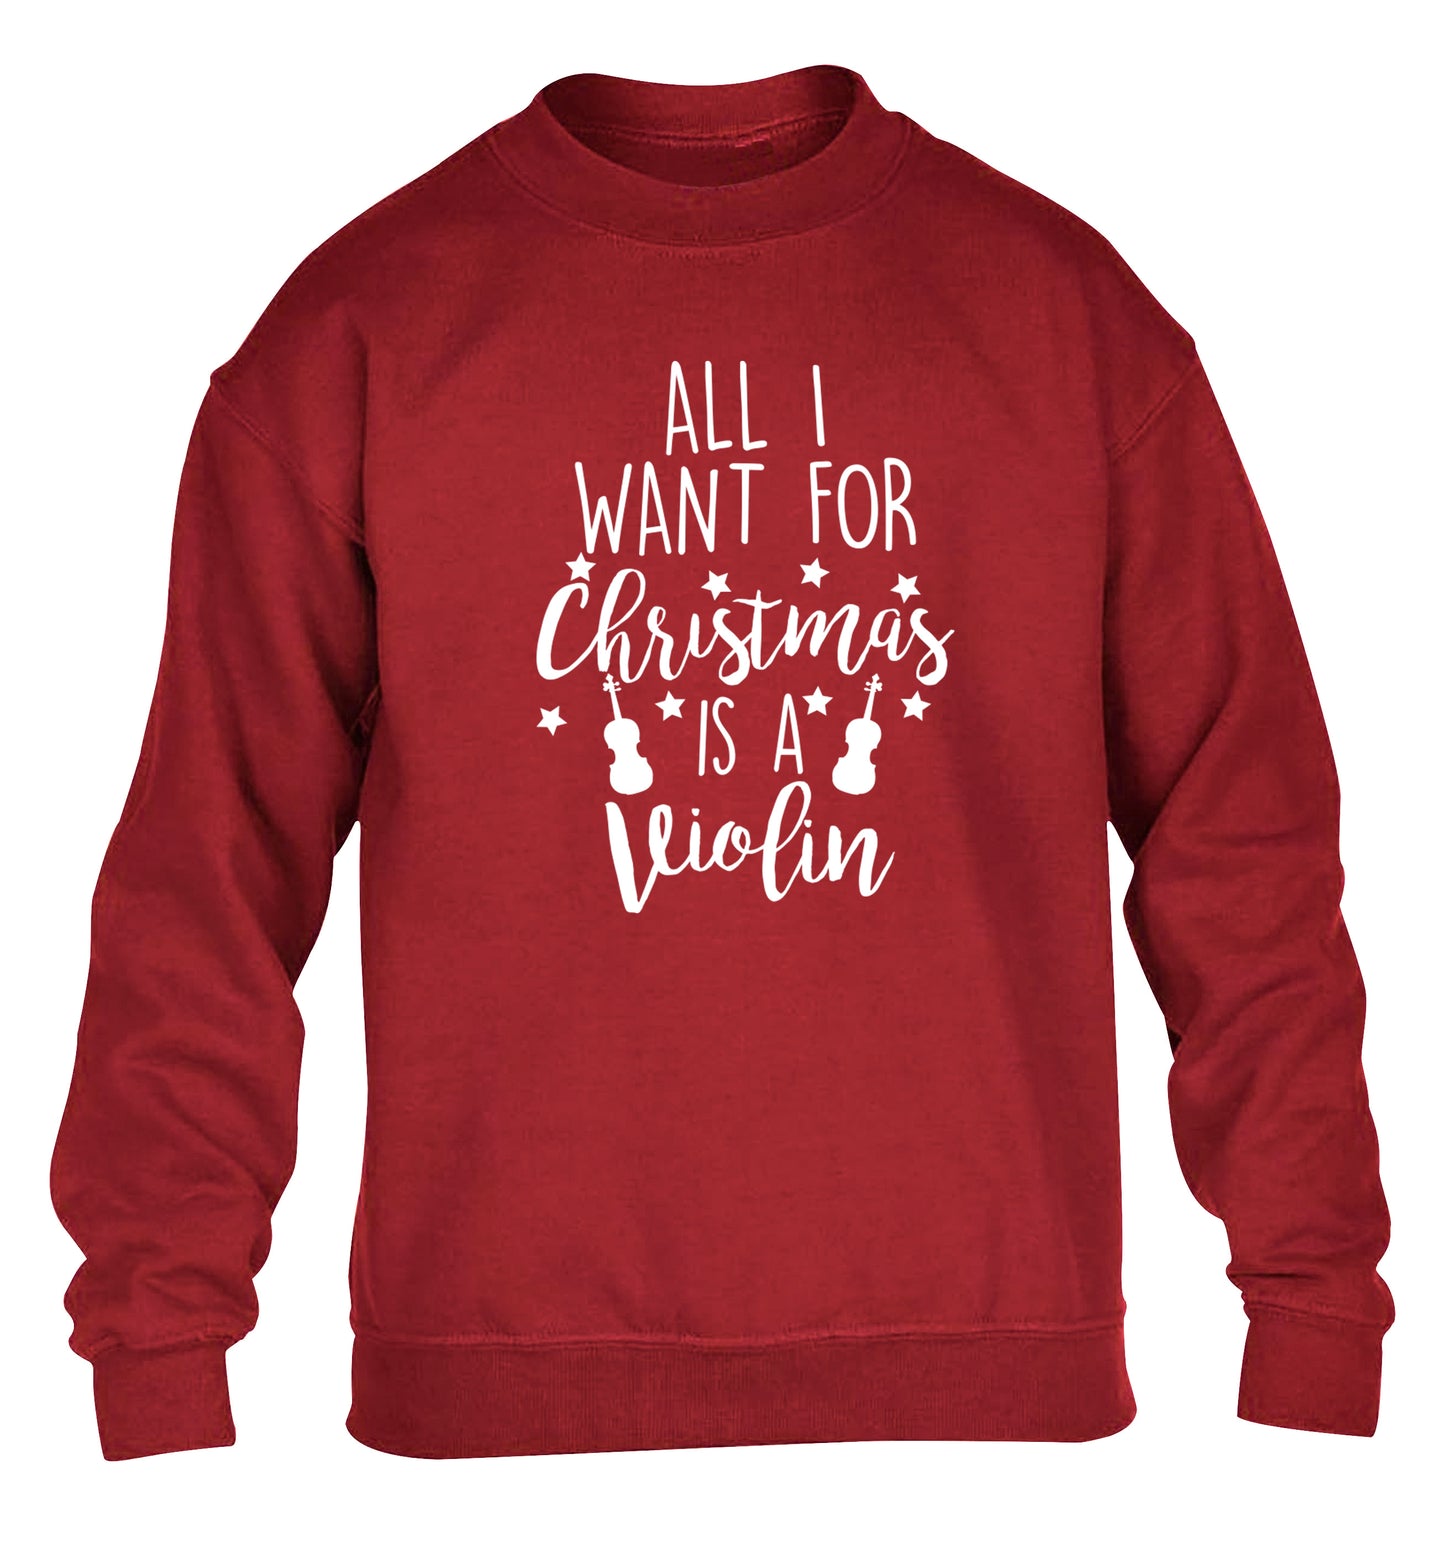 All I Want For Christmas is a Violin children's grey sweater 12-13 Years